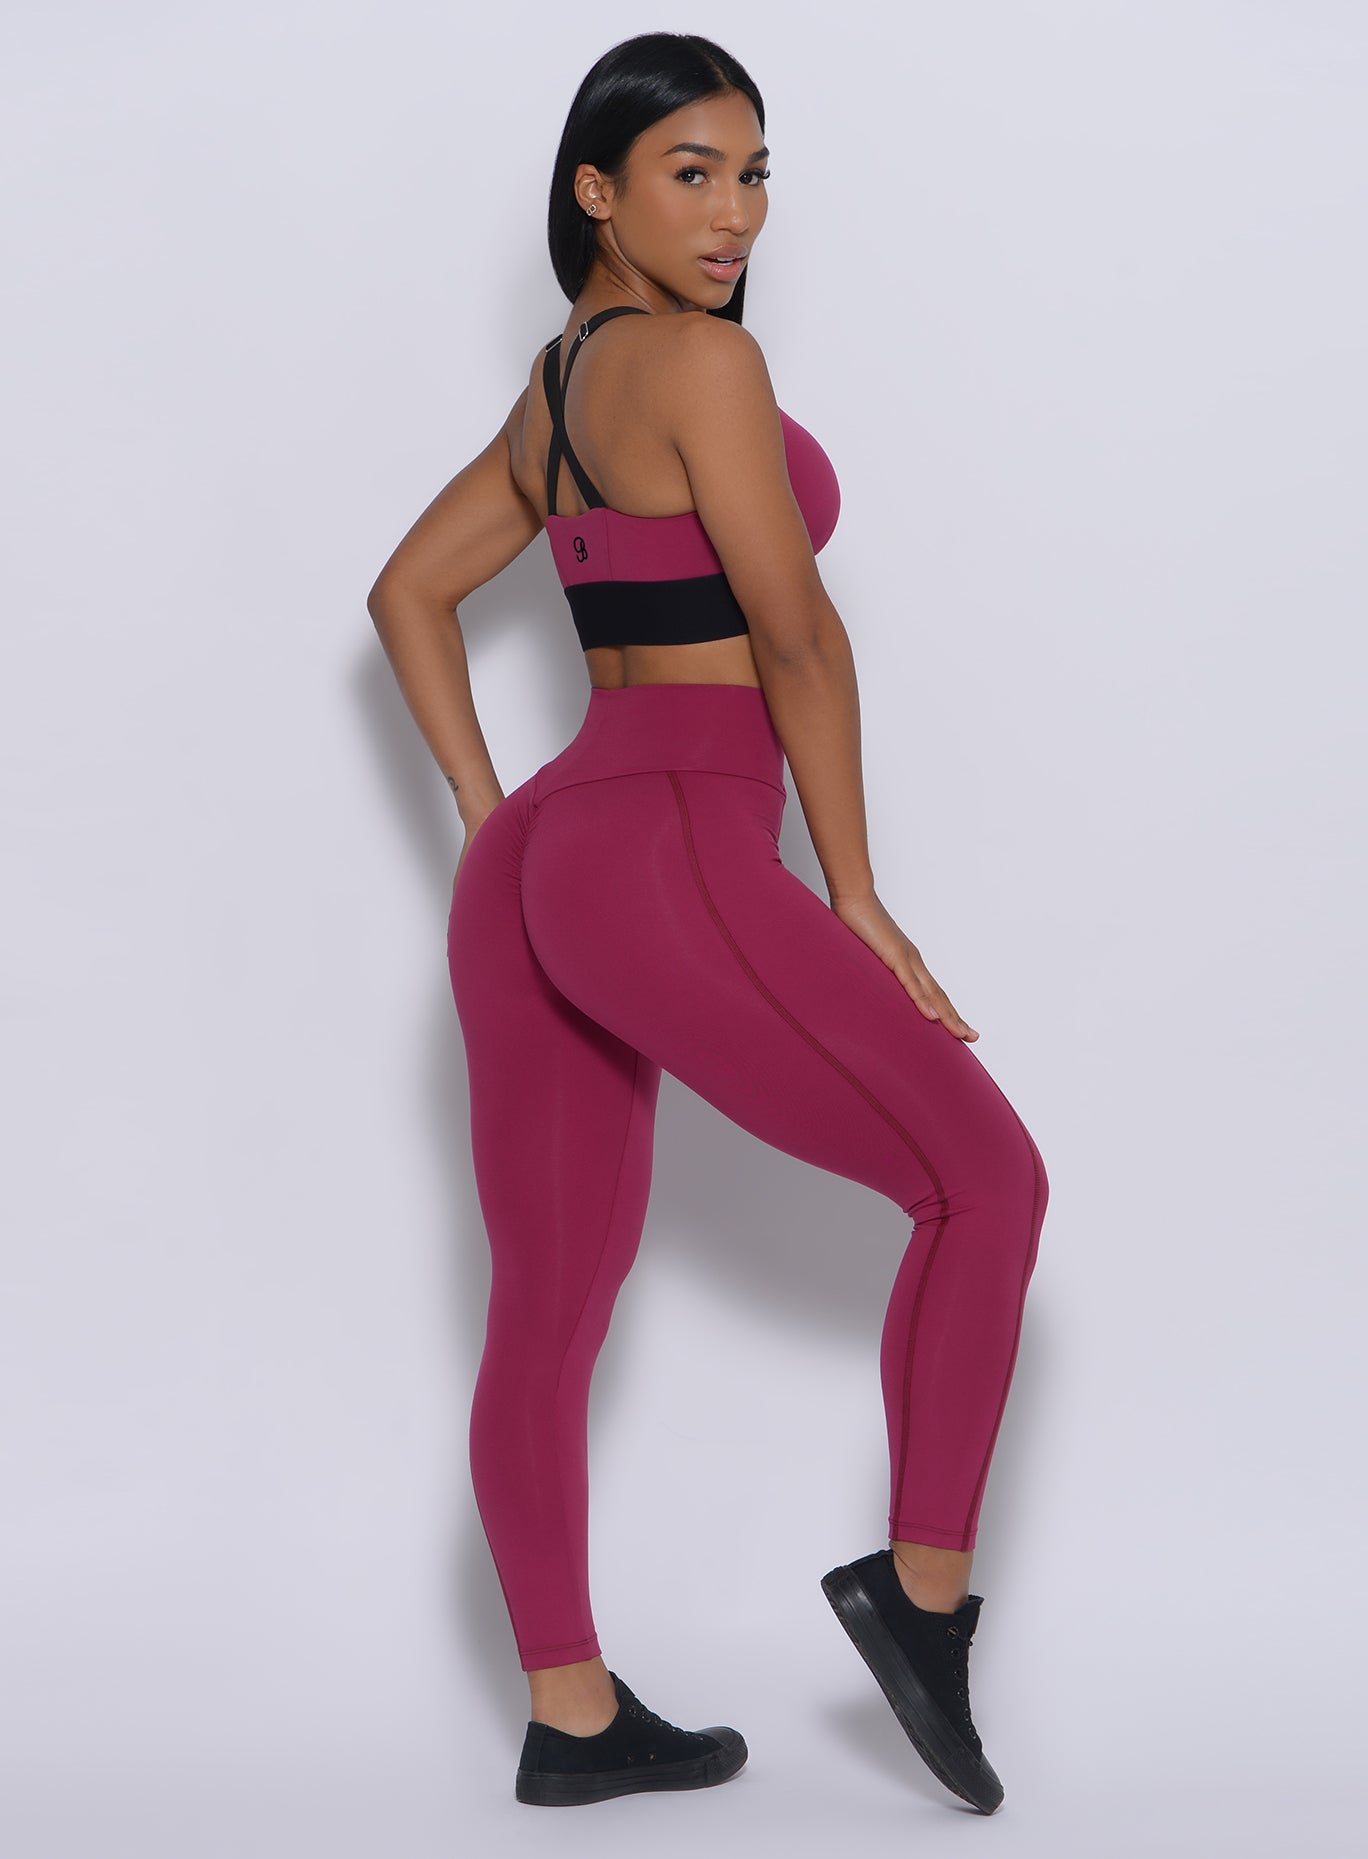 back side view of the model wearing our Brazilian leggings in mulberry color and a matching bra